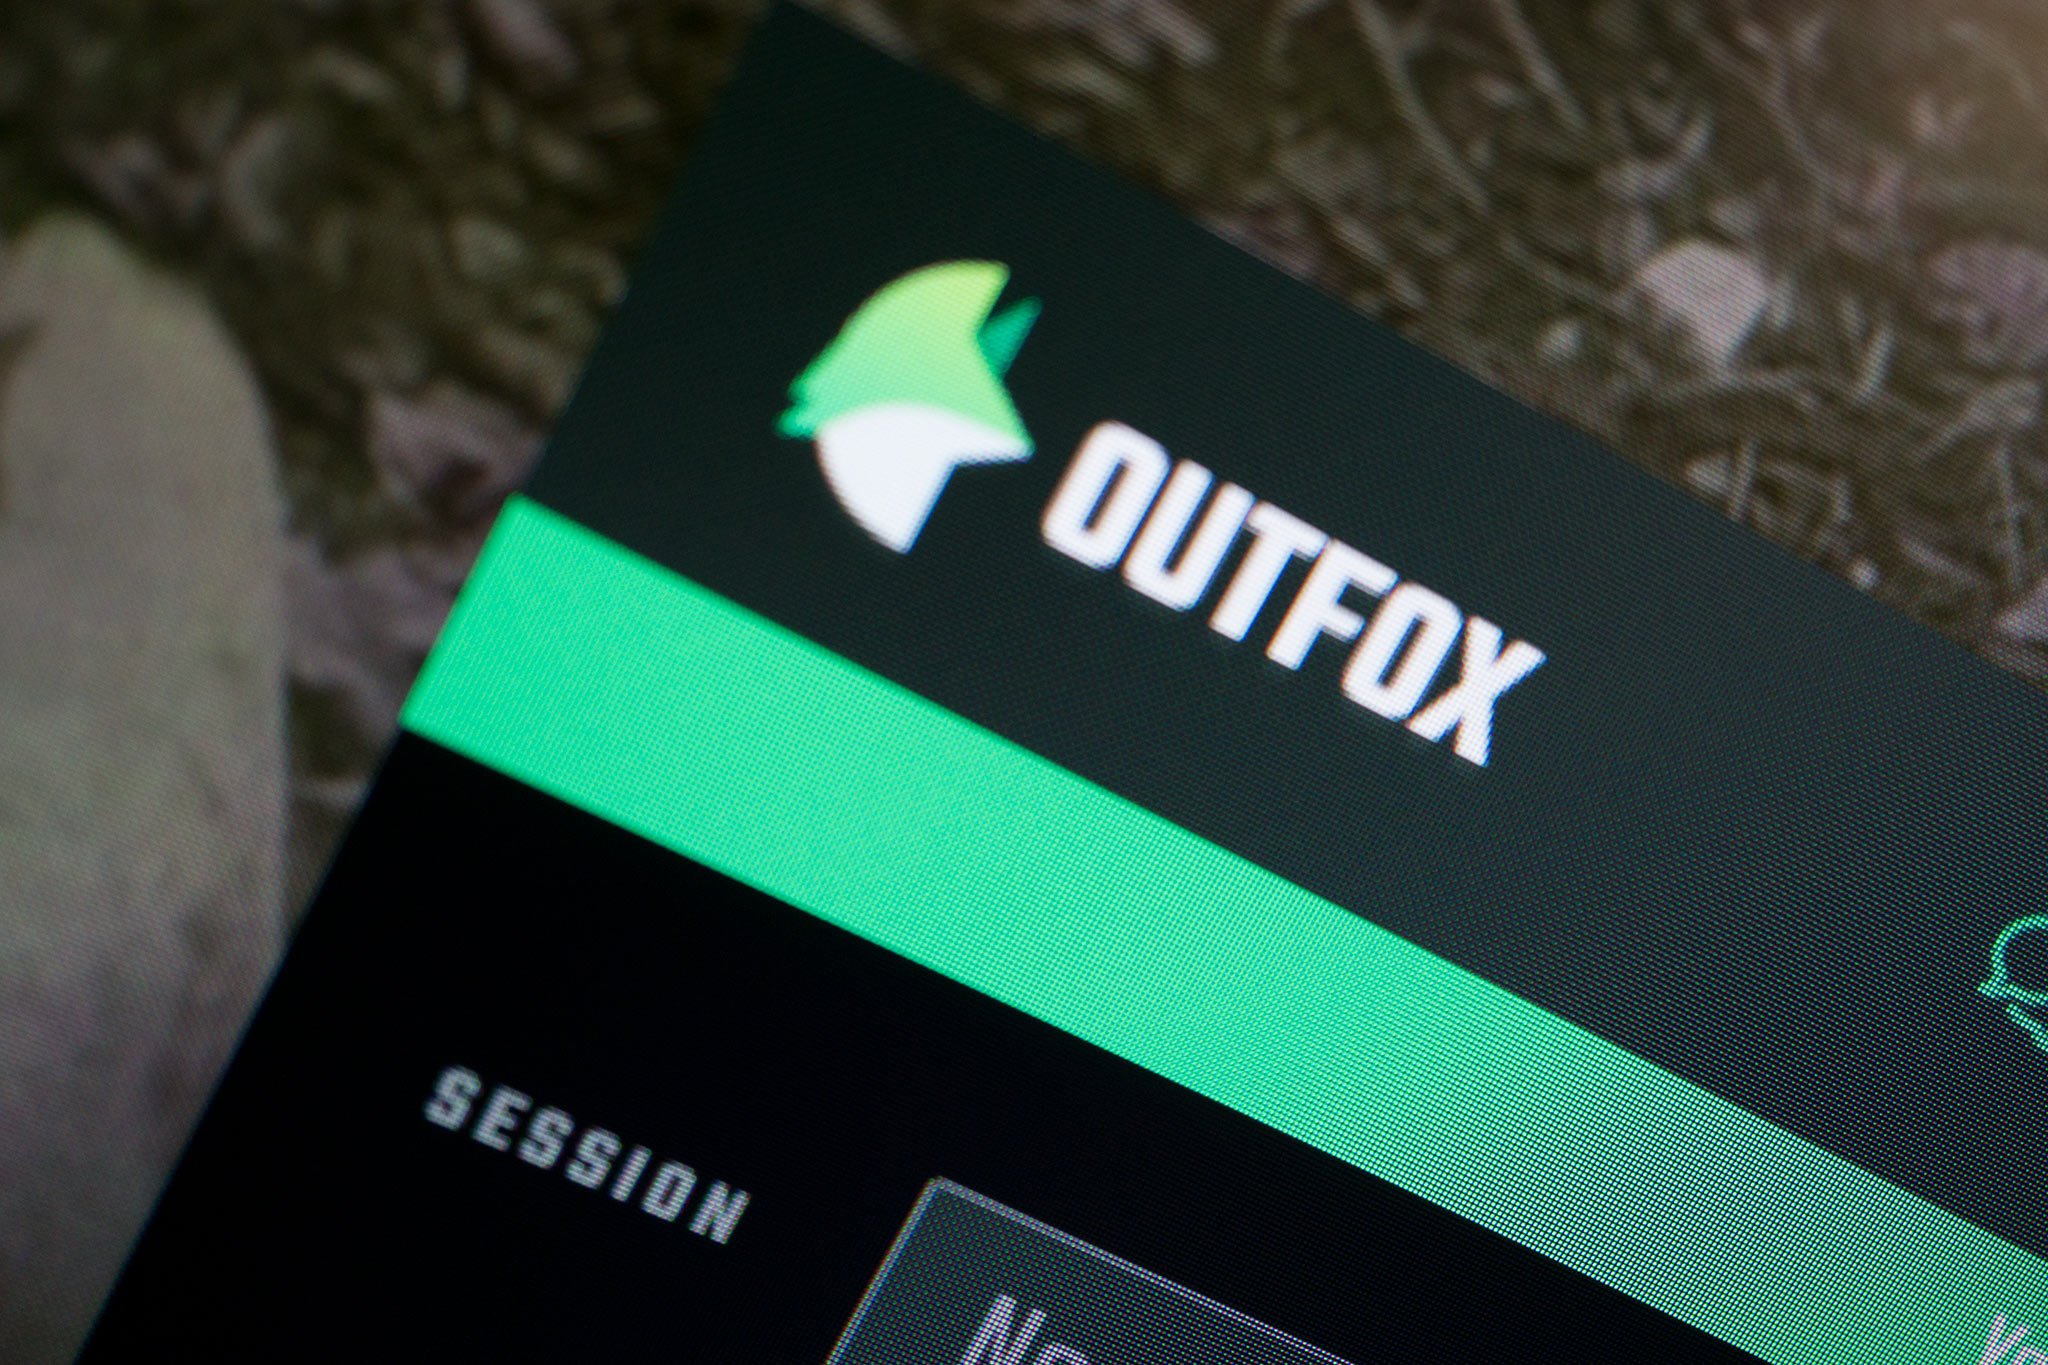 Outfox Can Reduce Latency And Ping In Your Games Windows Central